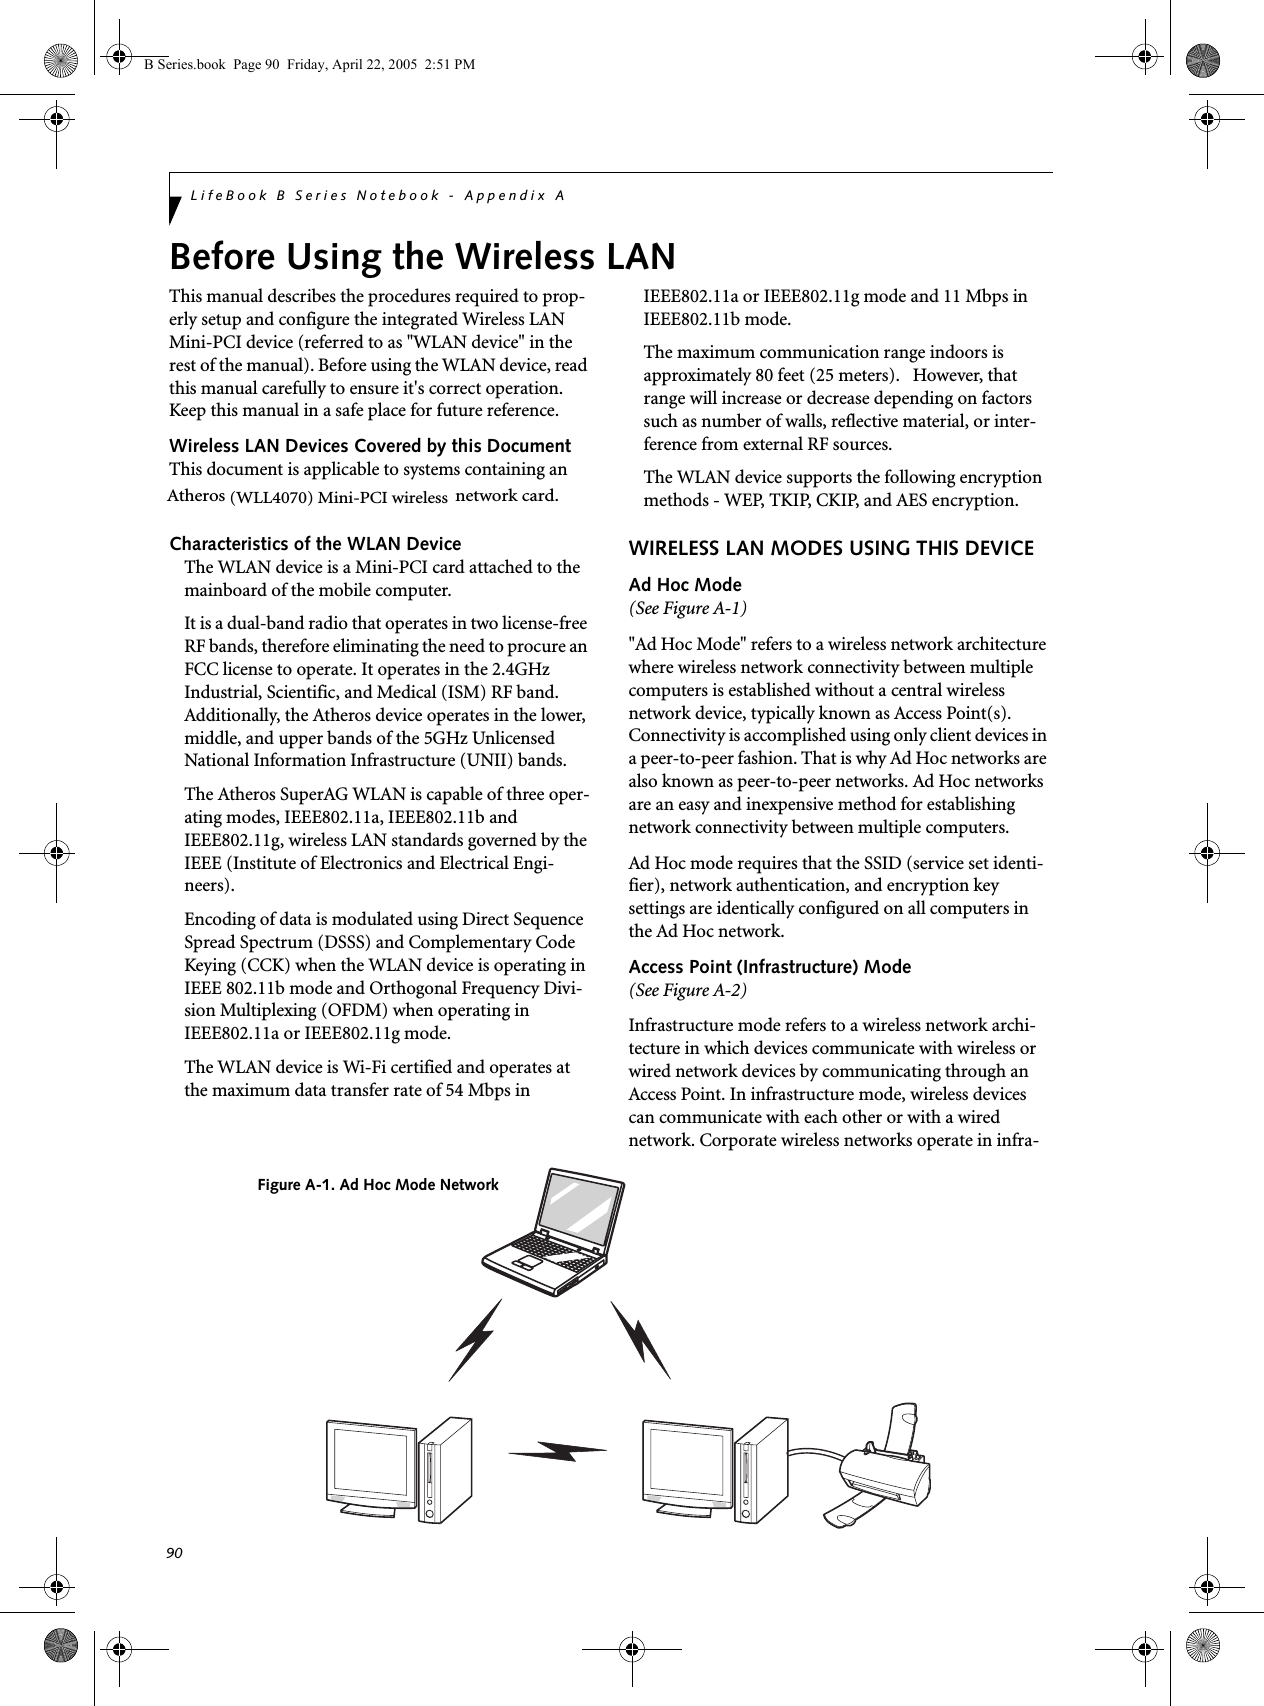 90LifeBook B Series Notebook - Appendix ABefore Using the Wireless LANThis manual describes the procedures required to prop-erly setup and configure the integrated Wireless LAN Mini-PCI device (referred to as &quot;WLAN device&quot; in the rest of the manual). Before using the WLAN device, read this manual carefully to ensure it&apos;s correct operation. Keep this manual in a safe place for future reference.Wireless LAN Devices Covered by this DocumentThis document is applicable to systems containing an Atheros (WLL4070) Mini-PCI wireless network card.Characteristics of the WLAN DeviceThe WLAN device is a Mini-PCI card attached to the mainboard of the mobile computer. It is a dual-band radio that operates in two license-free RF bands, therefore eliminating the need to procure an FCC license to operate. It operates in the 2.4GHz Industrial, Scientific, and Medical (ISM) RF band. Additionally, the Atheros device operates in the lower, middle, and upper bands of the 5GHz Unlicensed National Information Infrastructure (UNII) bands. The Atheros SuperAG WLAN is capable of three oper-ating modes, IEEE802.11a, IEEE802.11b and IEEE802.11g, wireless LAN standards governed by the IEEE (Institute of Electronics and Electrical Engi-neers). Encoding of data is modulated using Direct Sequence Spread Spectrum (DSSS) and Complementary Code Keying (CCK) when the WLAN device is operating in IEEE 802.11b mode and Orthogonal Frequency Divi-sion Multiplexing (OFDM) when operating in IEEE802.11a or IEEE802.11g mode. The WLAN device is Wi-Fi certified and operates at the maximum data transfer rate of 54 Mbps in IEEE802.11a or IEEE802.11g mode and 11 Mbps in IEEE802.11b mode.The maximum communication range indoors is approximately 80 feet (25 meters).   However, that range will increase or decrease depending on factors such as number of walls, reflective material, or inter-ference from external RF sources.The WLAN device supports the following encryption methods - WEP, TKIP, CKIP, and AES encryption.WIRELESS LAN MODES USING THIS DEVICEAd Hoc Mode (See Figure A-1)&quot;Ad Hoc Mode&quot; refers to a wireless network architecture where wireless network connectivity between multiple computers is established without a central wireless network device, typically known as Access Point(s). Connectivity is accomplished using only client devices in a peer-to-peer fashion. That is why Ad Hoc networks are also known as peer-to-peer networks. Ad Hoc networks are an easy and inexpensive method for establishing network connectivity between multiple computers.Ad Hoc mode requires that the SSID (service set identi-fier), network authentication, and encryption key settings are identically configured on all computers in the Ad Hoc network.  Access Point (Infrastructure) Mode (See Figure A-2)Infrastructure mode refers to a wireless network archi-tecture in which devices communicate with wireless or wired network devices by communicating through an Access Point. In infrastructure mode, wireless devices can communicate with each other or with a wired network. Corporate wireless networks operate in infra-Figure A-1. Ad Hoc Mode NetworkB Series.book  Page 90  Friday, April 22, 2005  2:51 PM